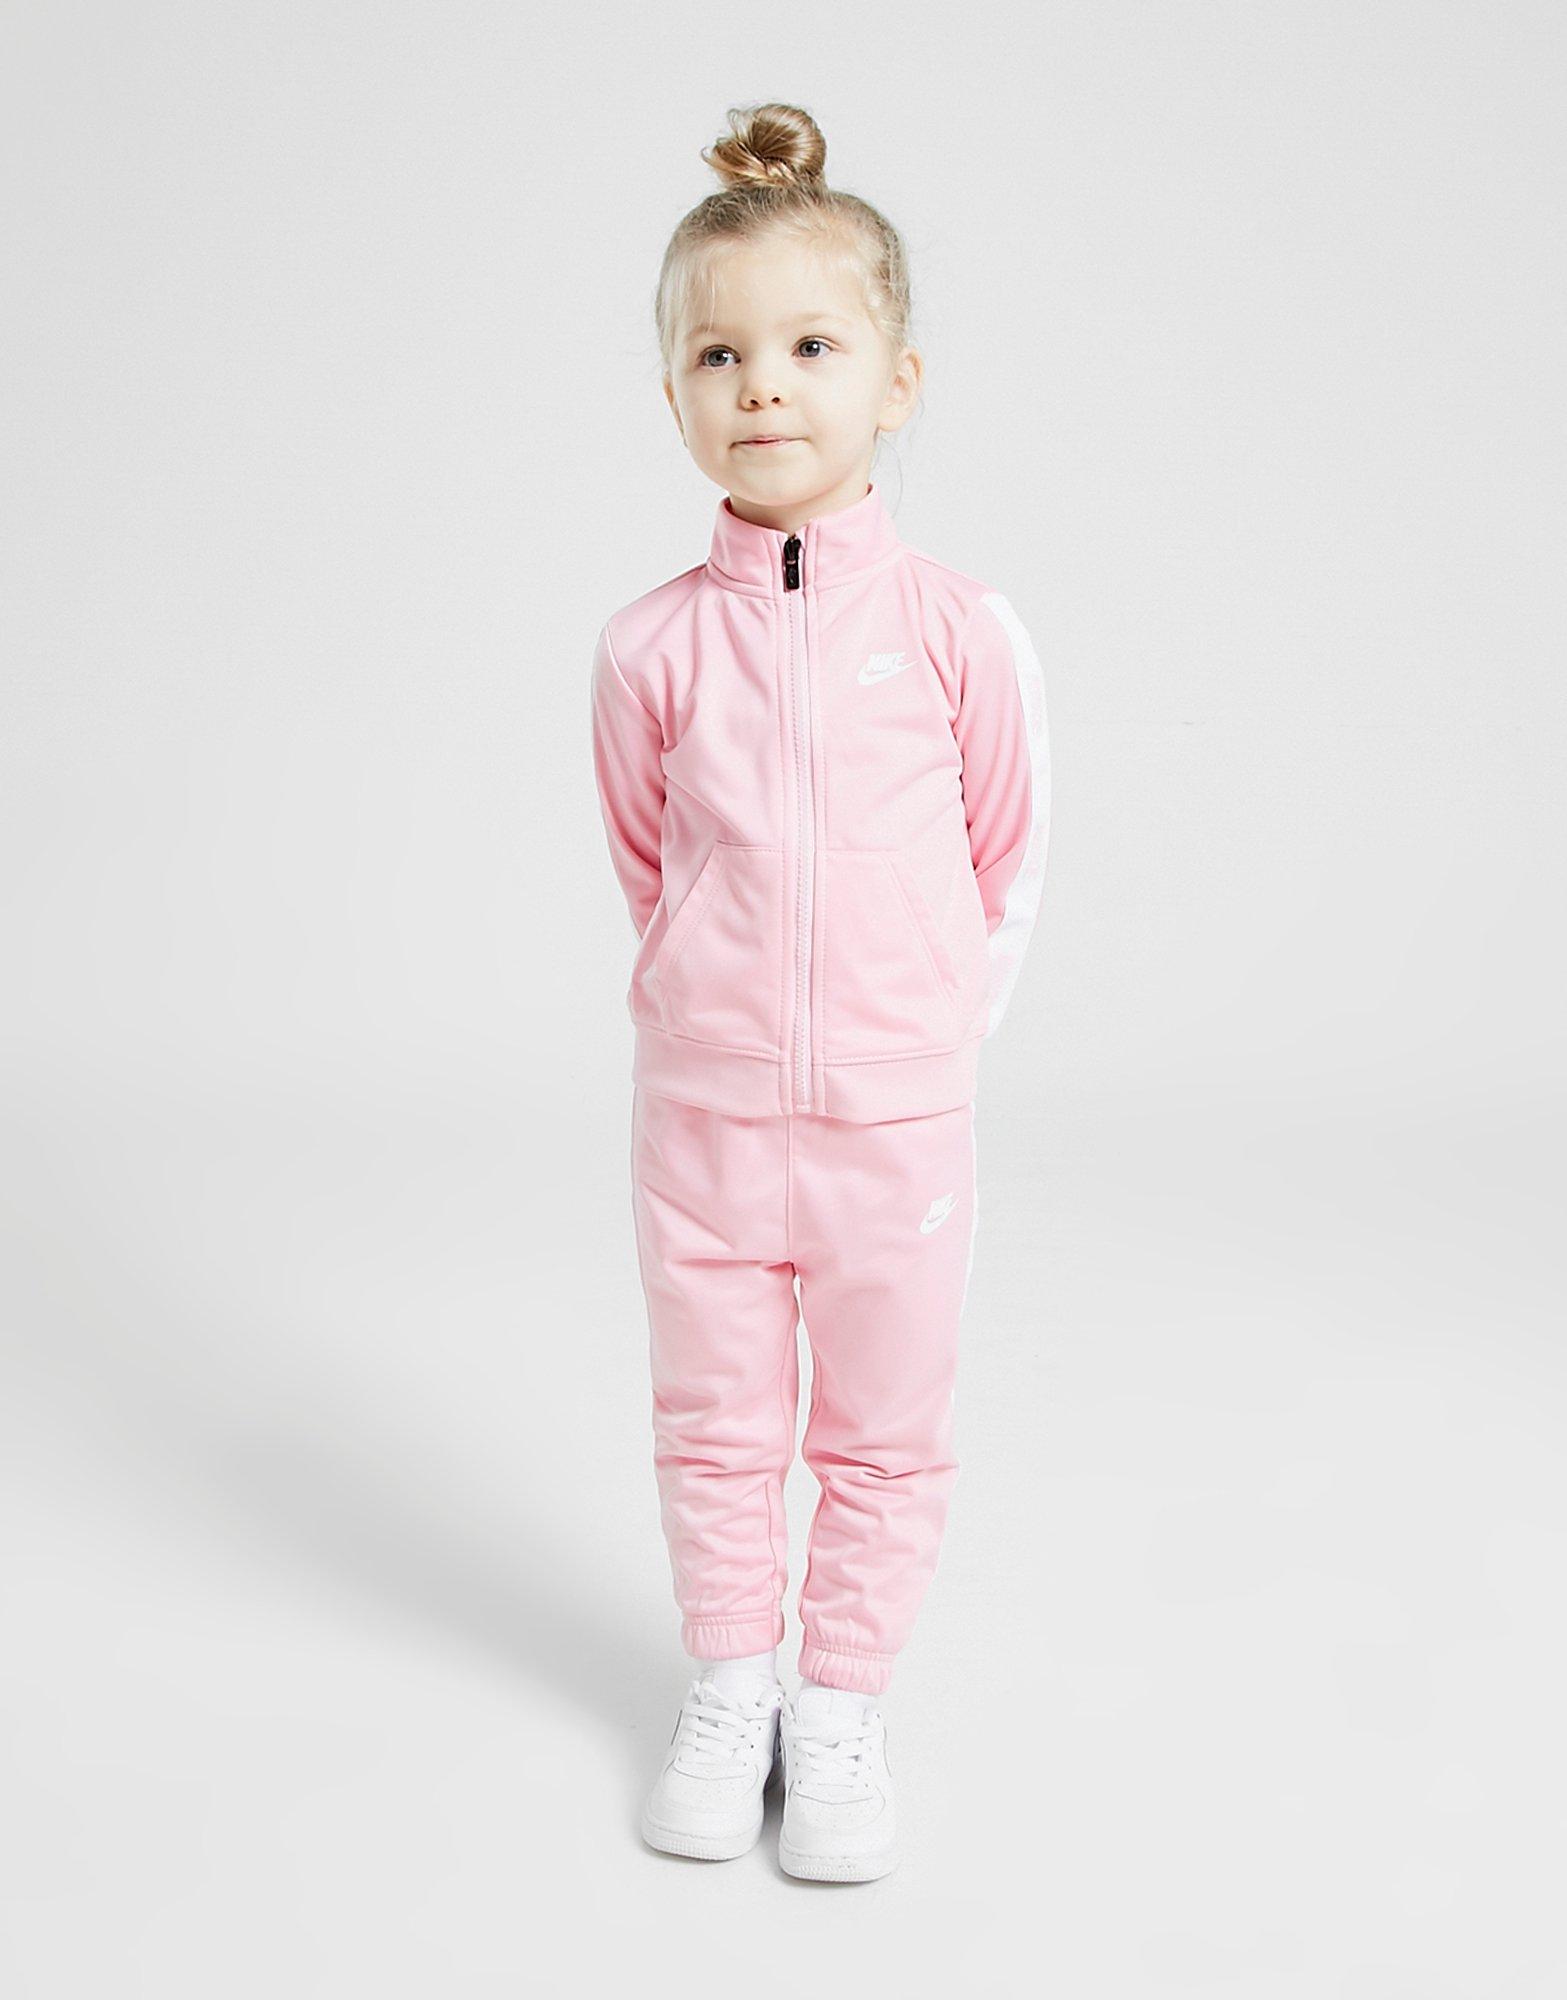 Nike Girls' Tricot Tracksuit Infant